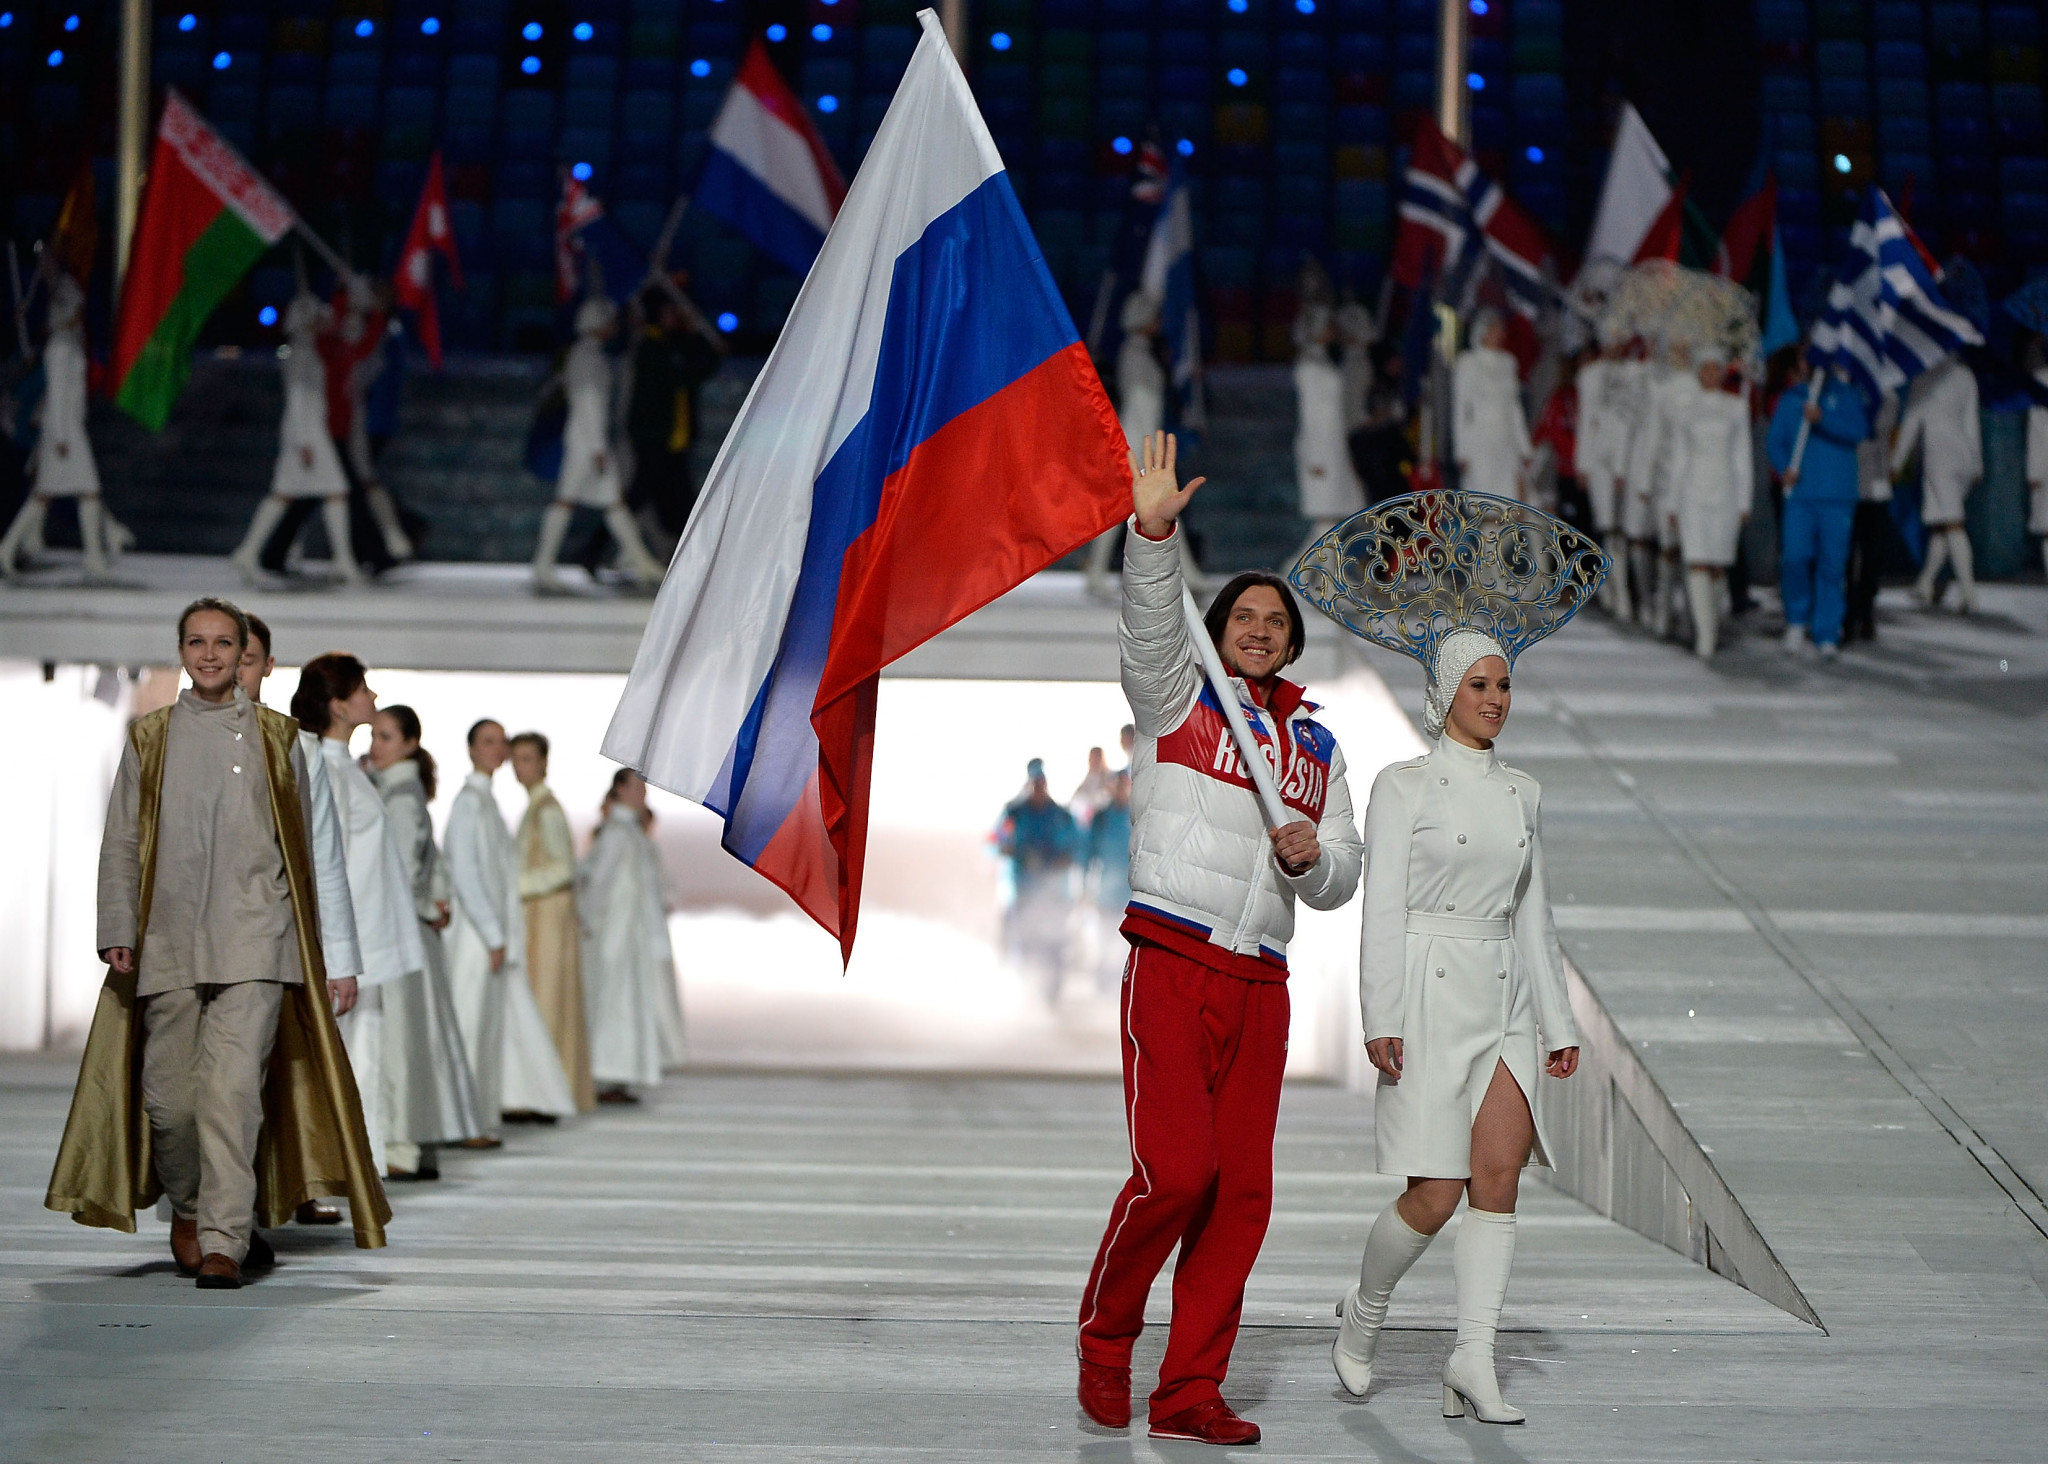 Skater Maxim Trankov enters with the Russian flag during the Closing Ceremony of Sochi 2014 ©Getty Images